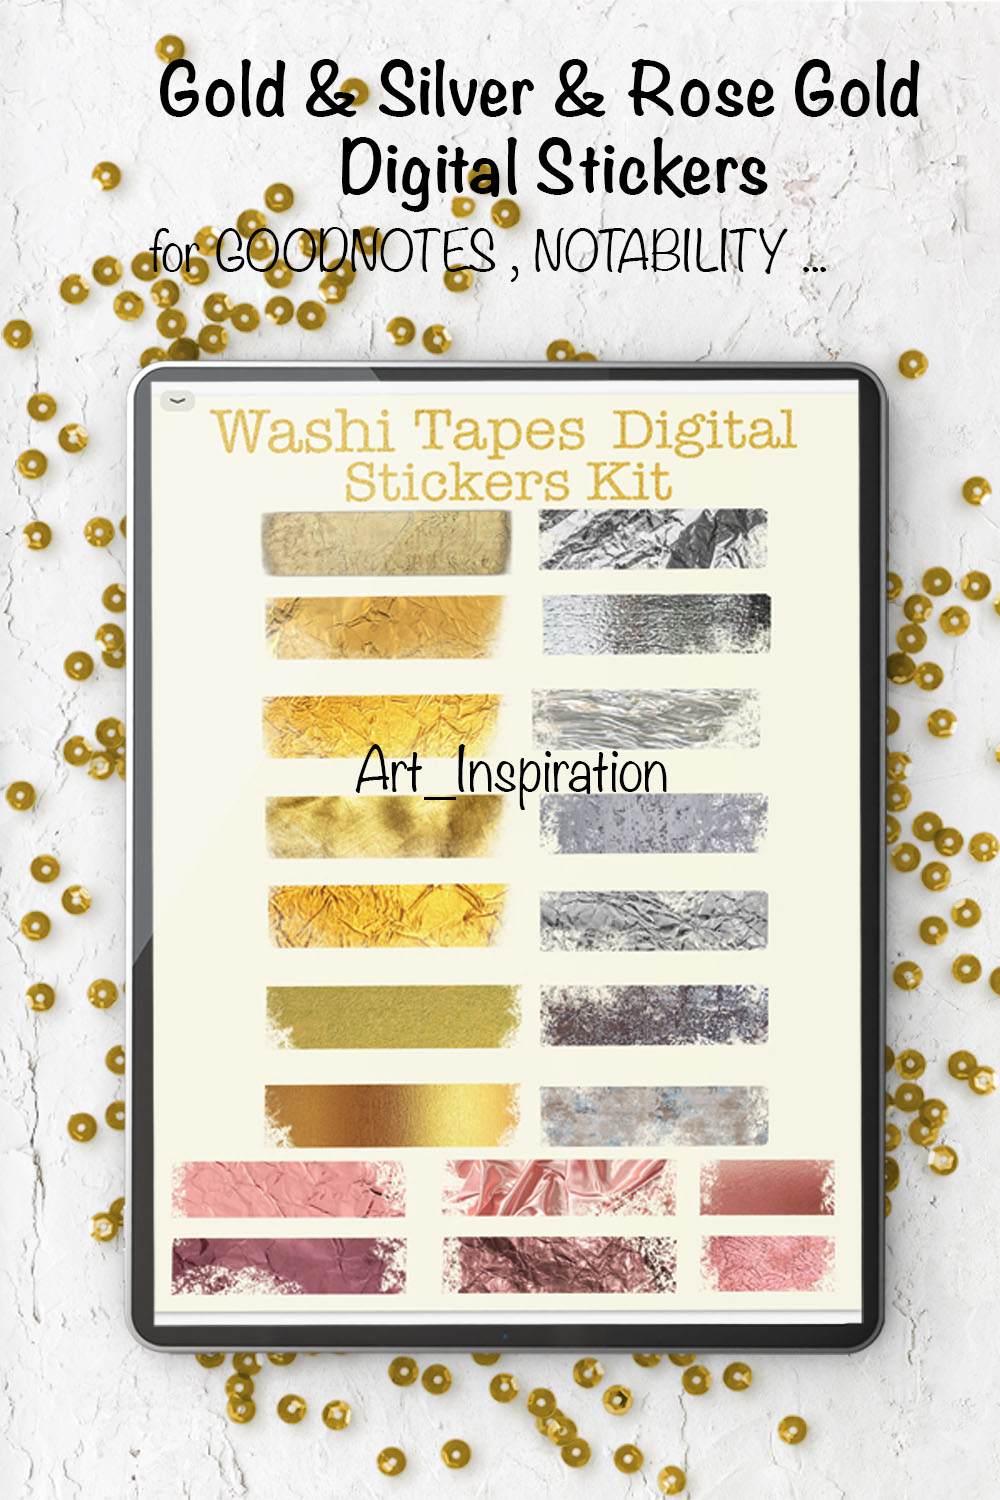 Washi Tapes. Digital planner sticker Kit for Goodnotes